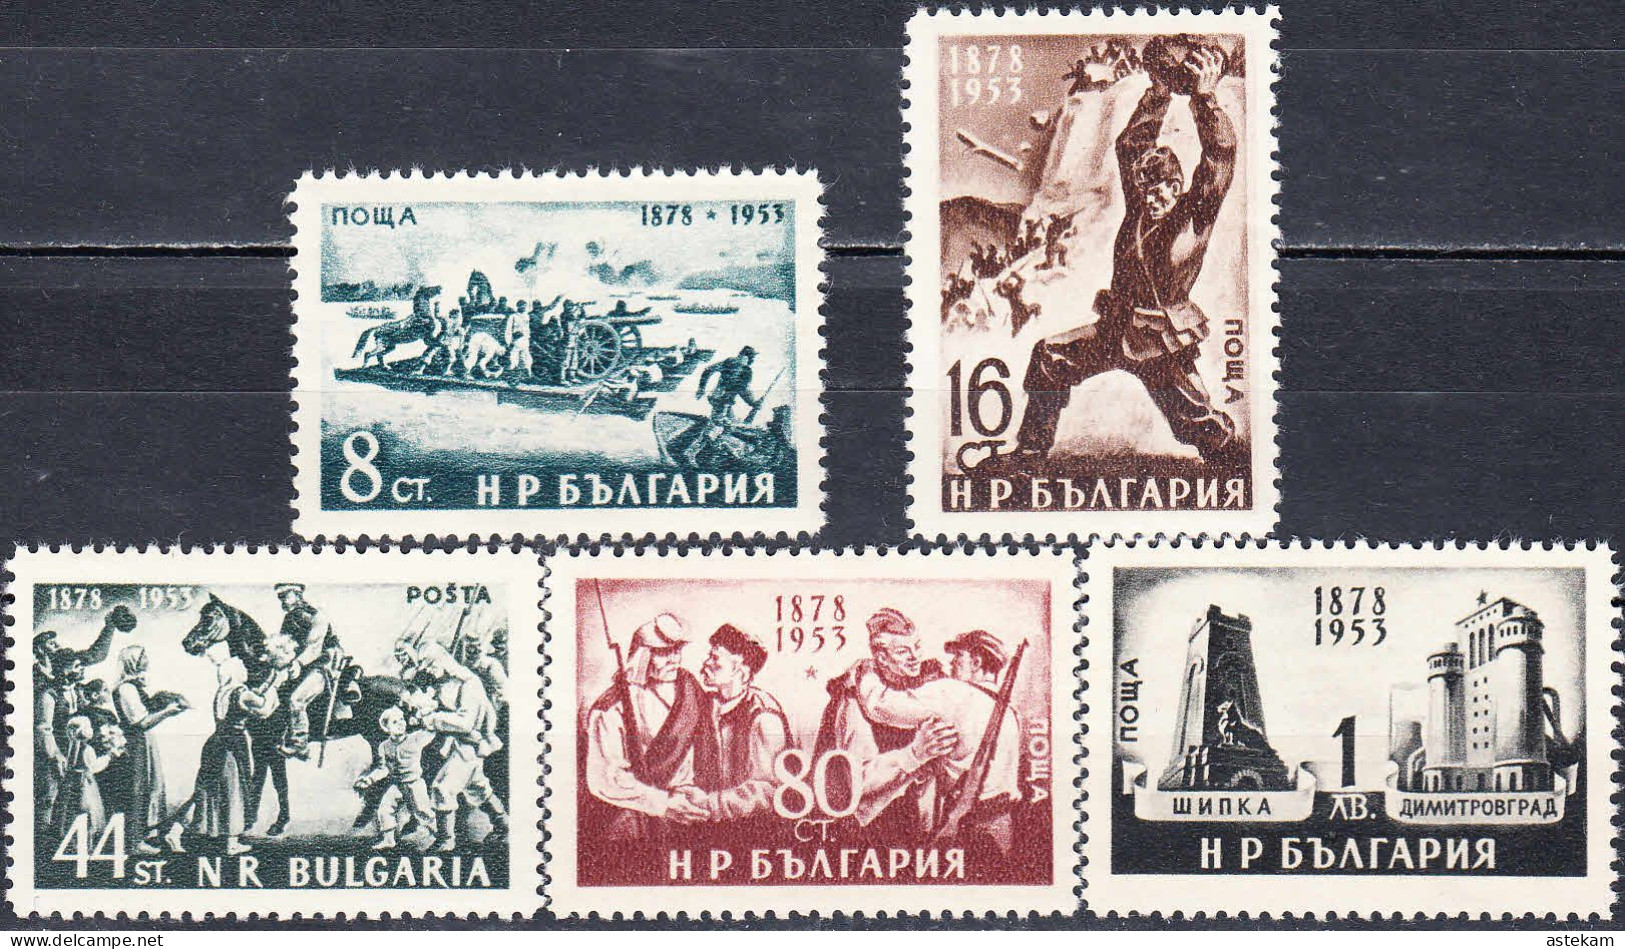 BULGARIA 1953, 75 YEARS Since LIBERATION Of TURKISH SLAVERY, COMPLETE, MNH SERIES With GOOD QUALITY, *** - Ungebraucht